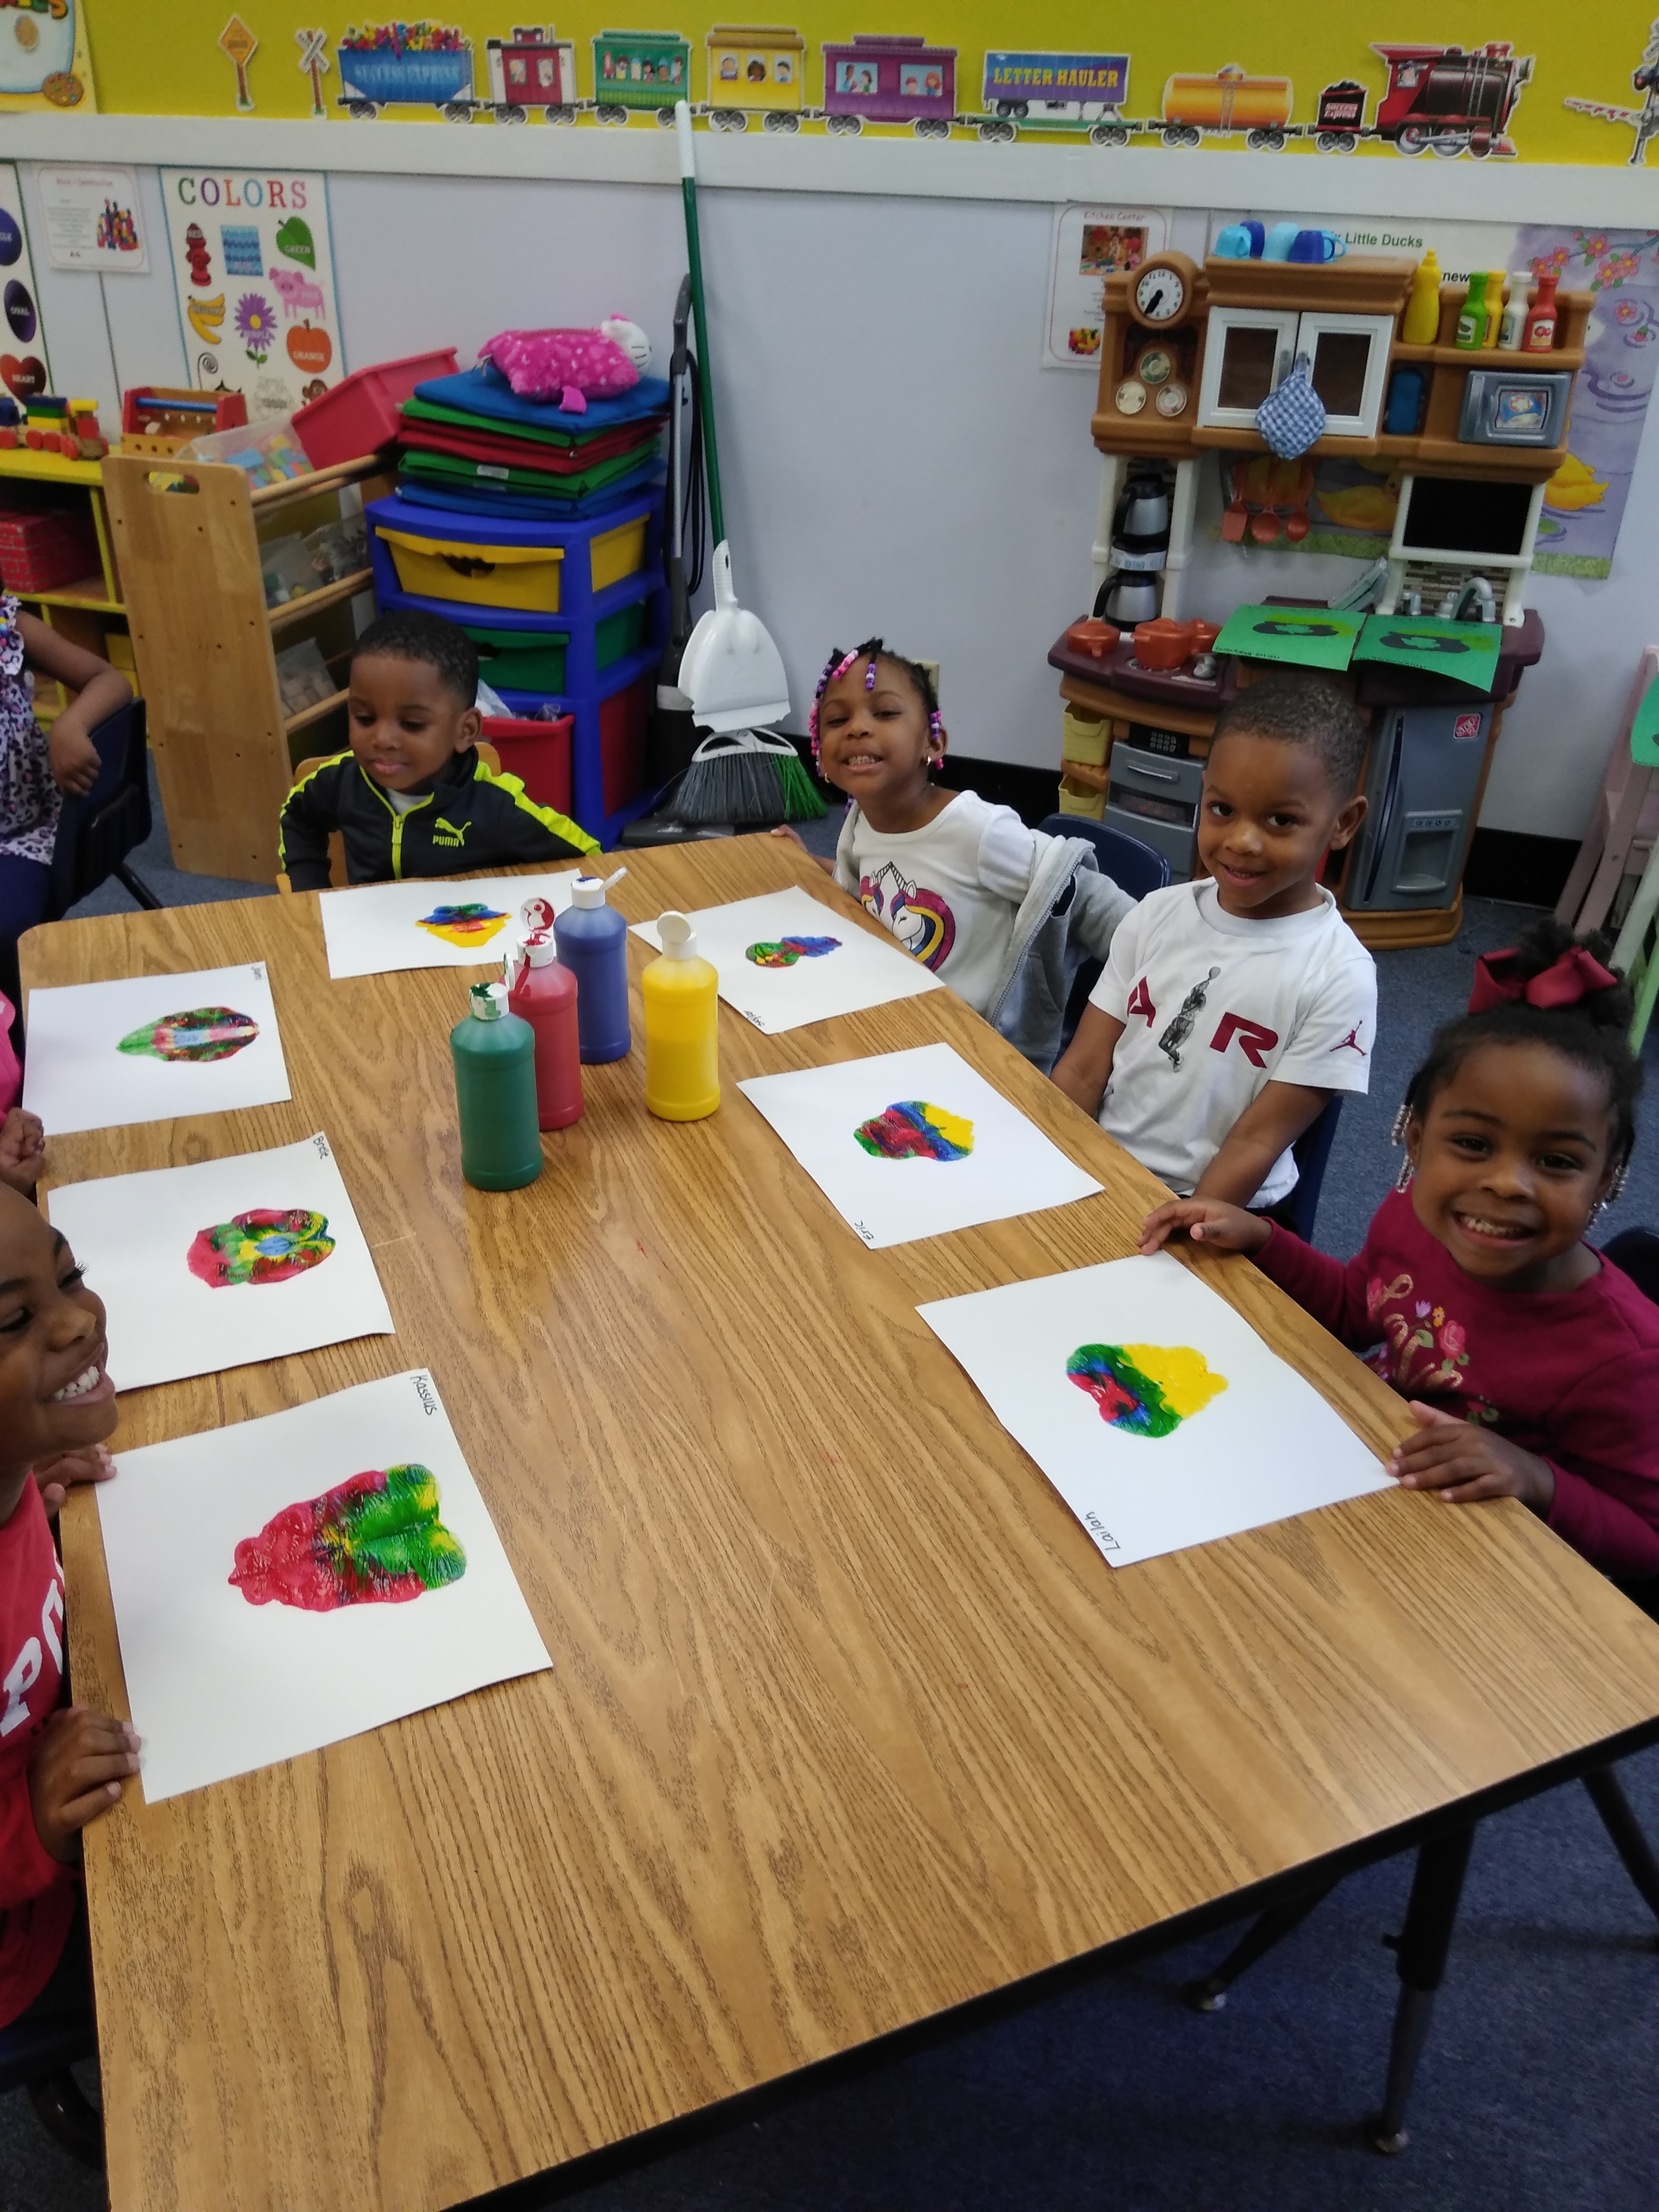 Rosby's Learning Childcare Center